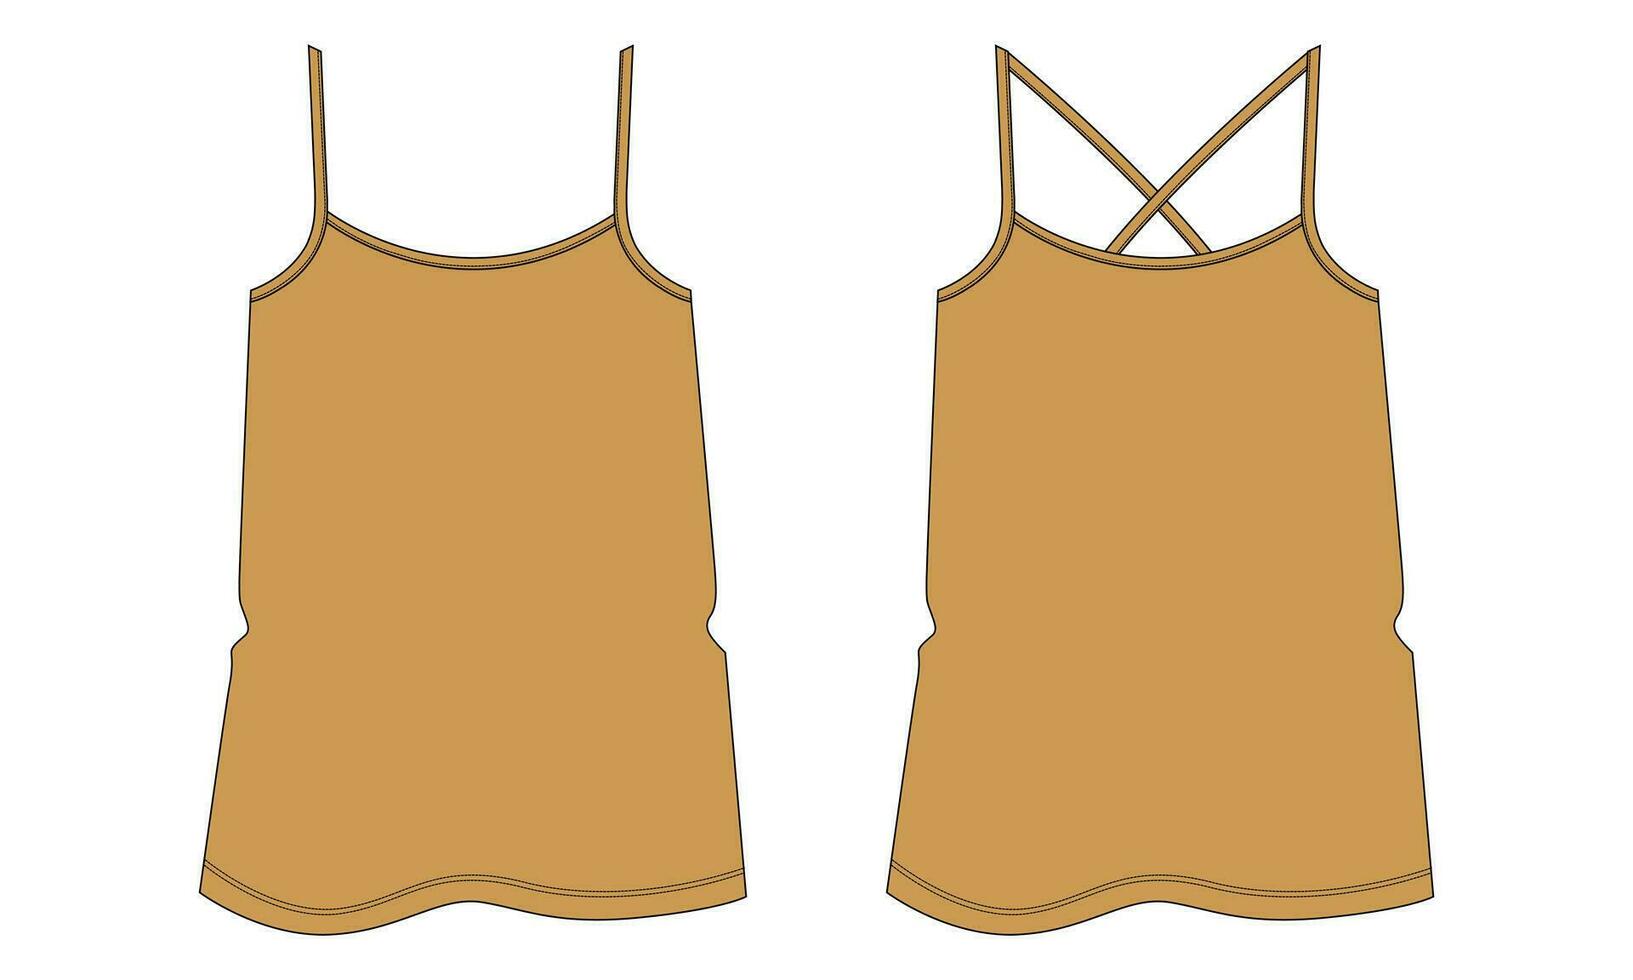 Ladies tank top tops vector illustration template front and back views isolated on white background